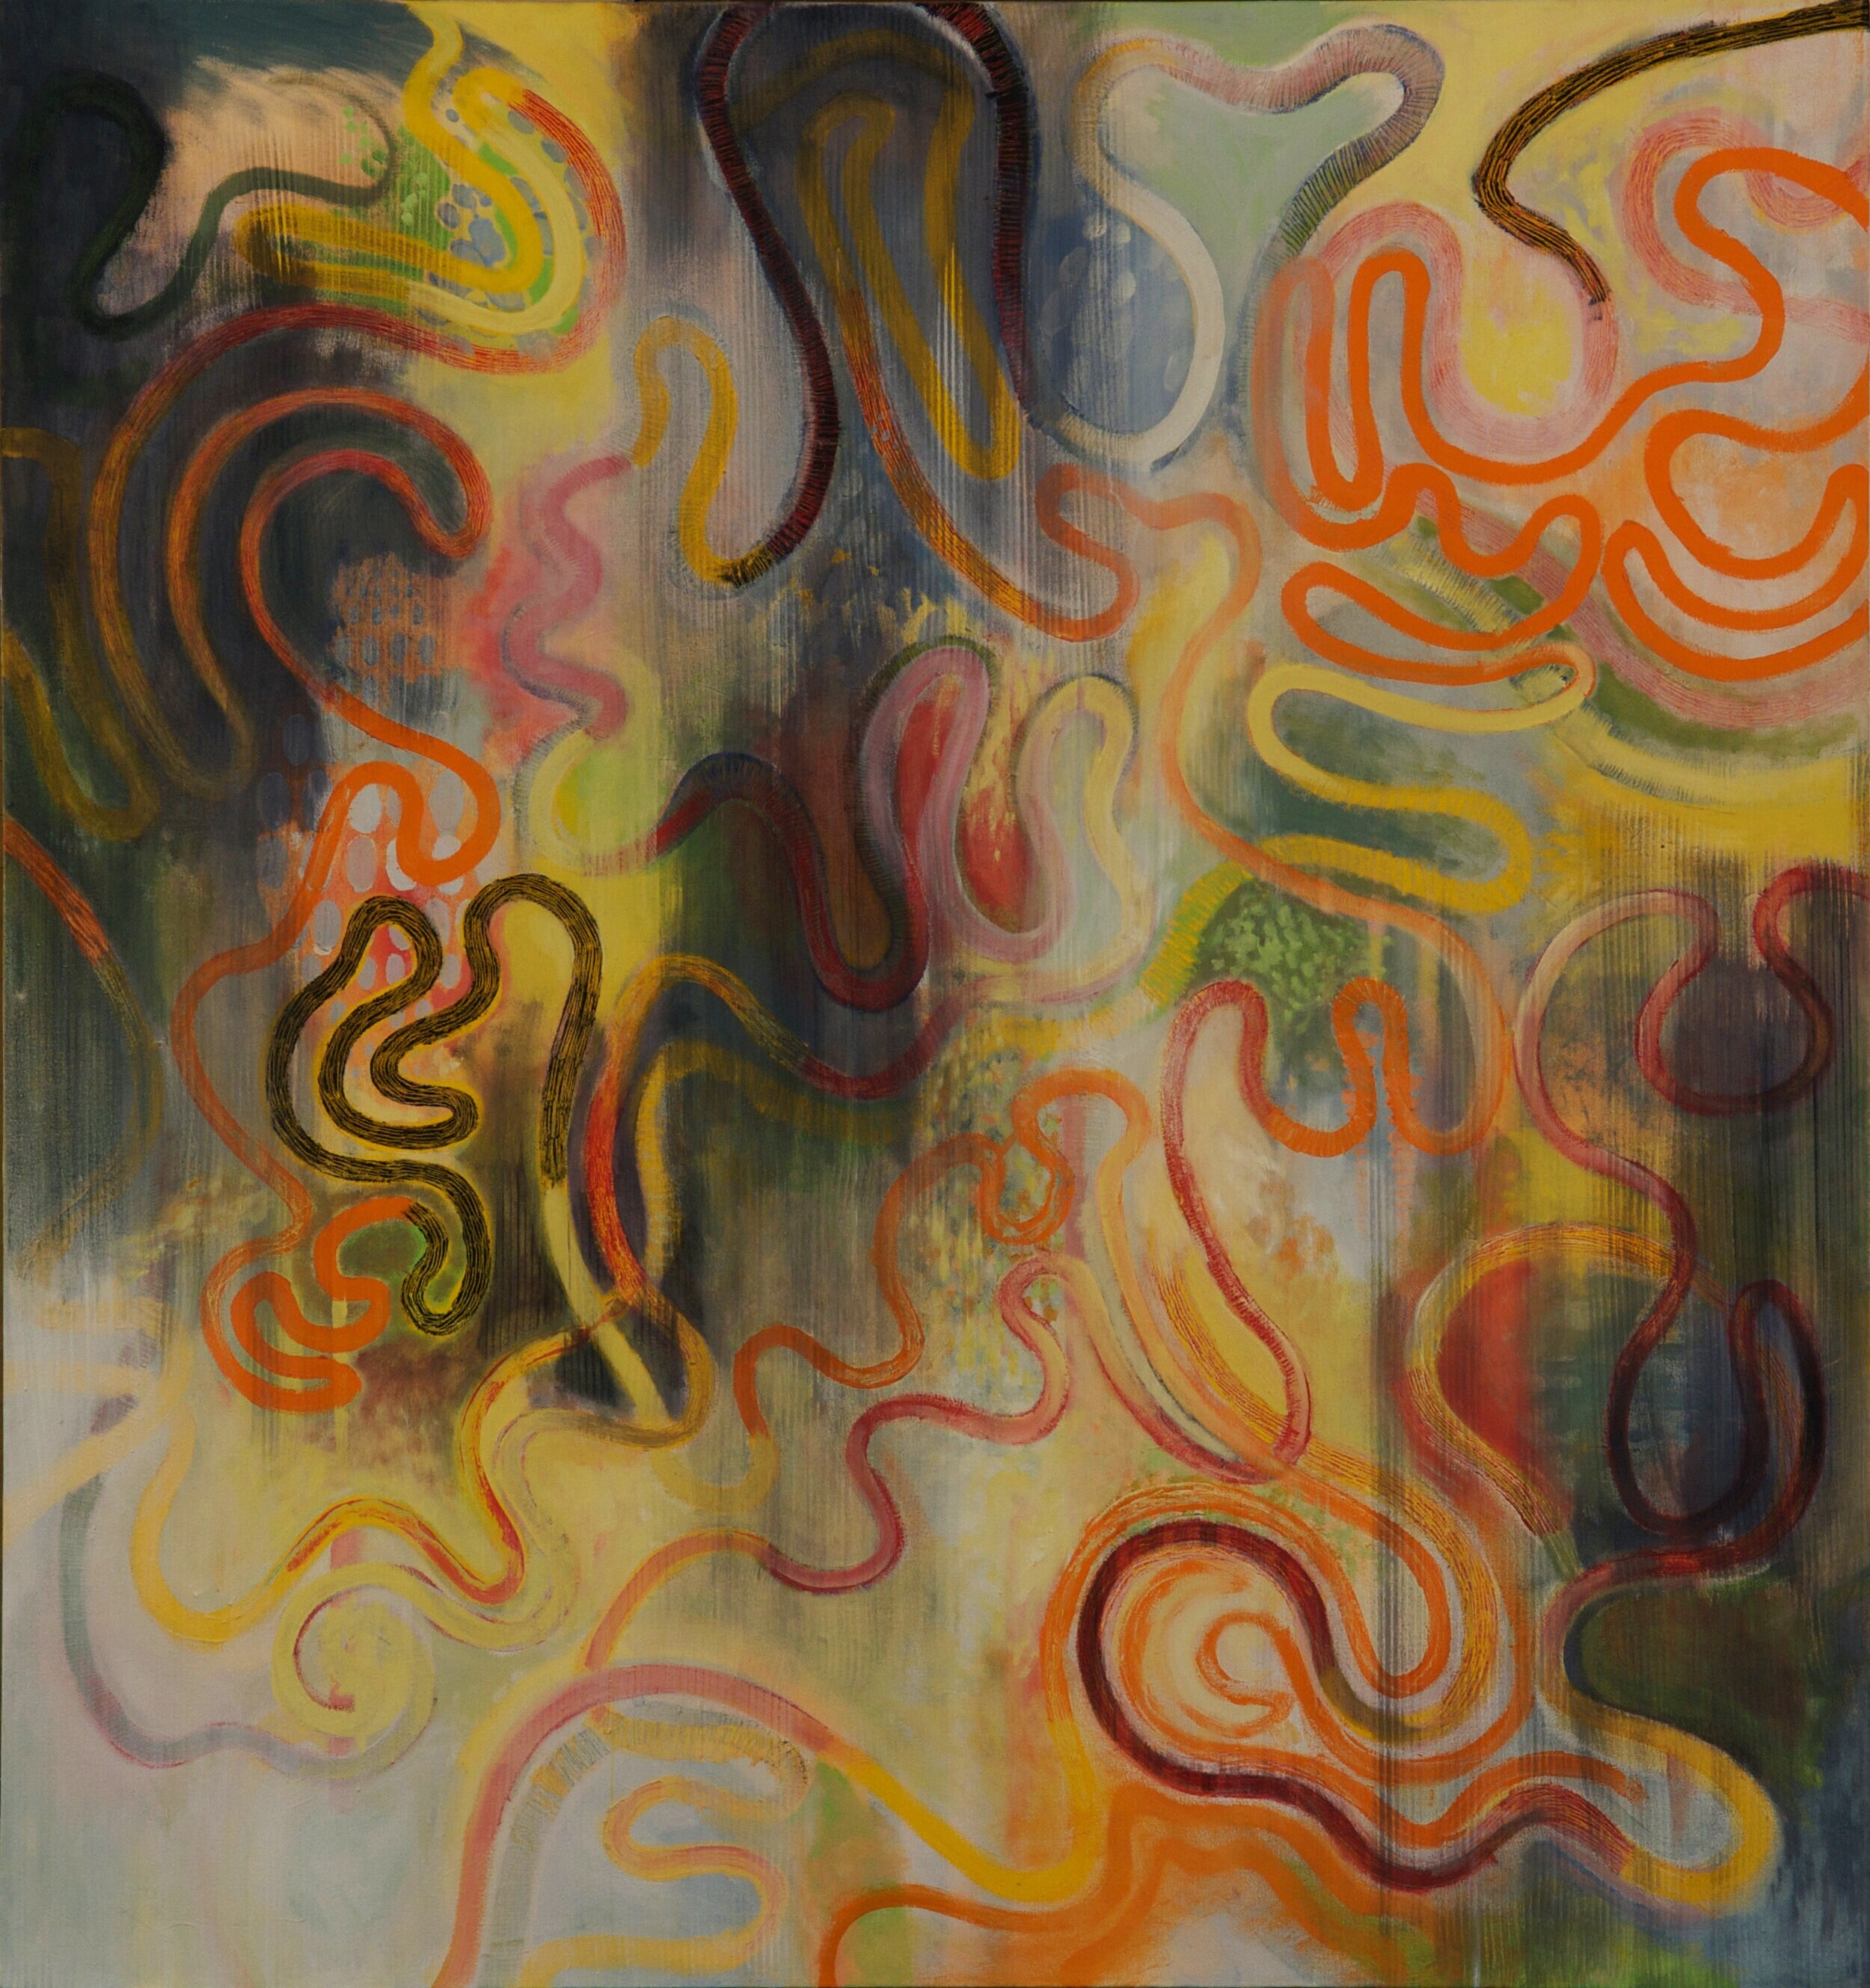   Ribbon 1 , 64” X 66”, Oil and wax on canvas, 2008-2009 